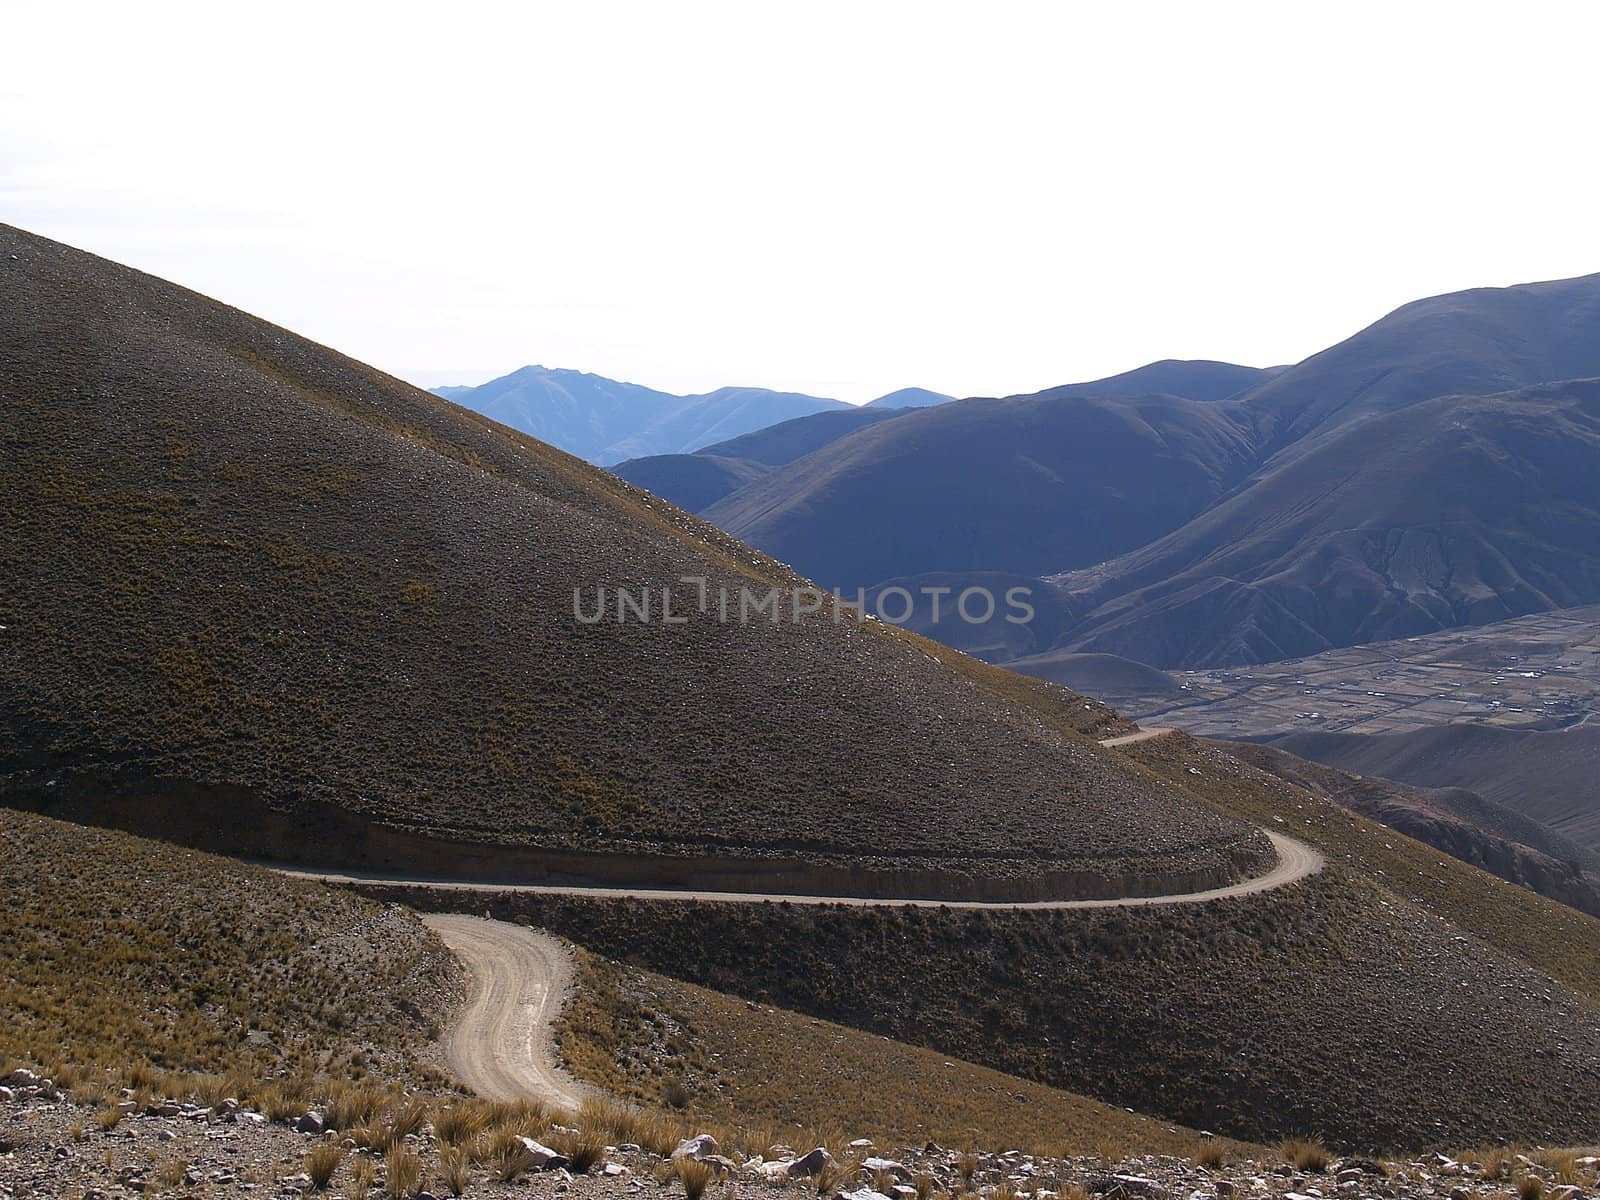 Argentina, Province of Jujuy           by lauria